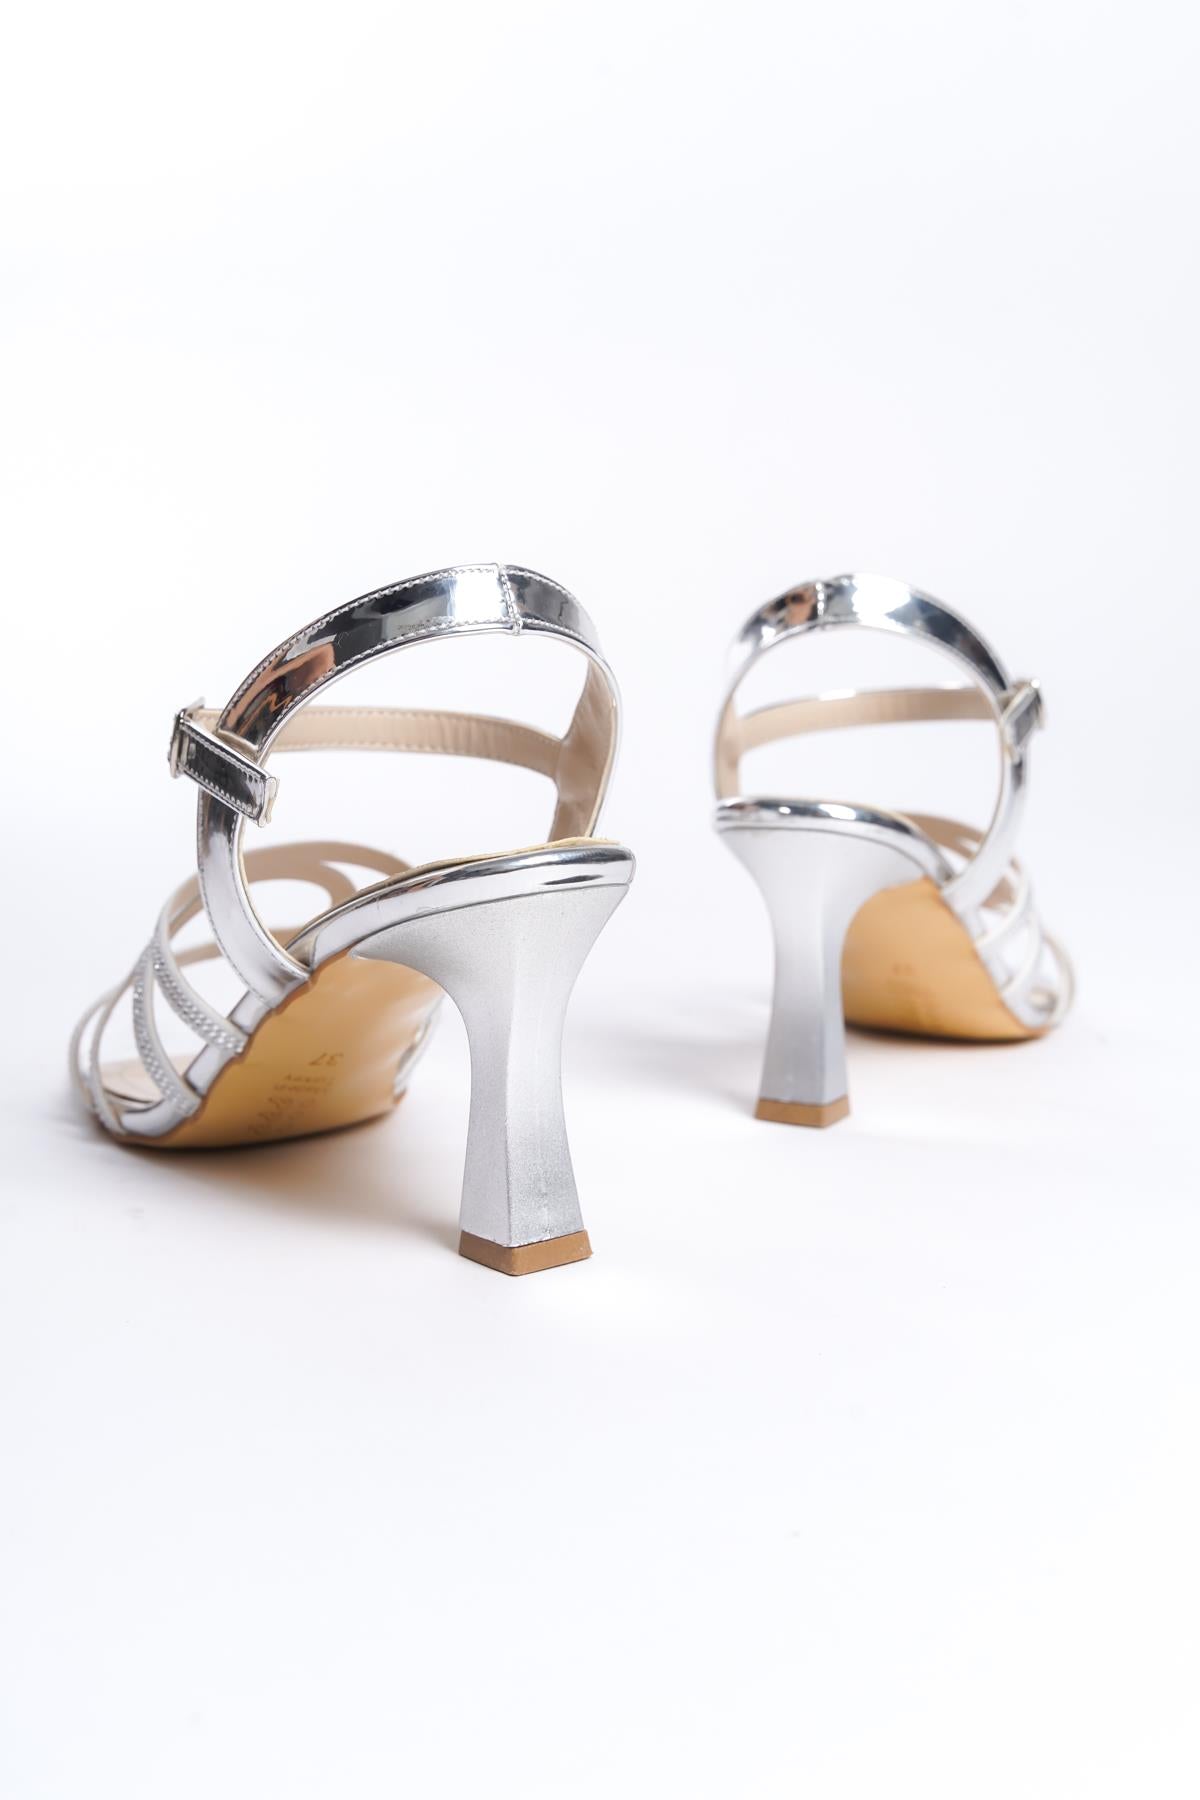 Women's Patent Leather Silver Thin Heel Stone Sandals 8 cm Heel - STREETMODE™